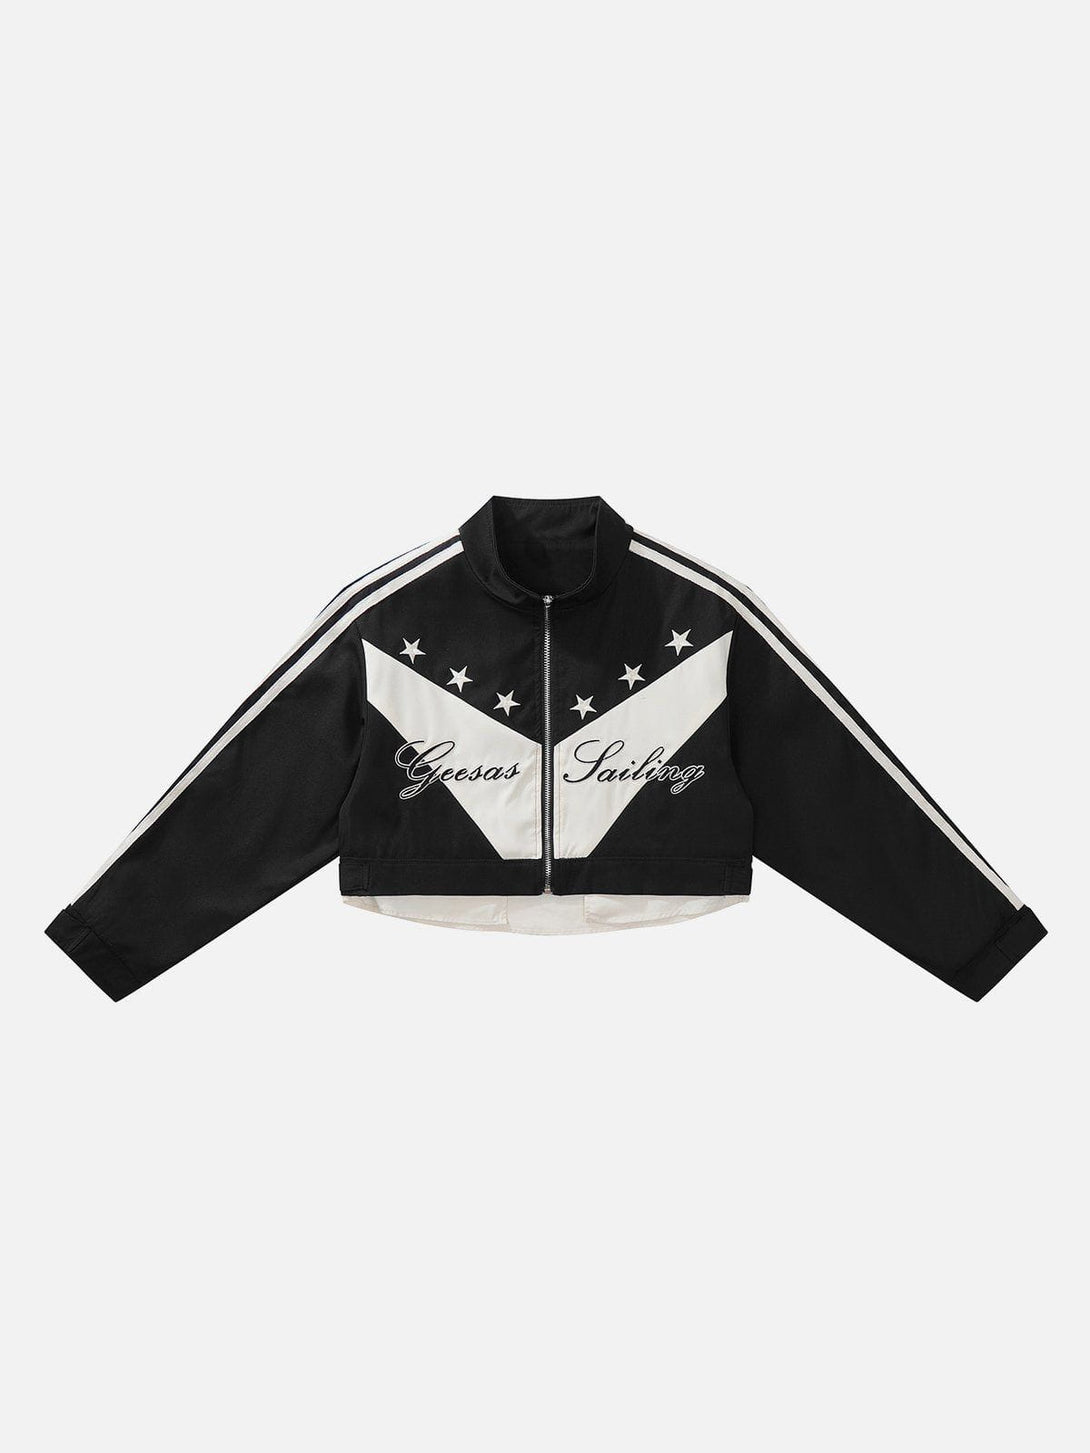 Levefly - Contrast Embroidered Set - Streetwear Fashion - levefly.com